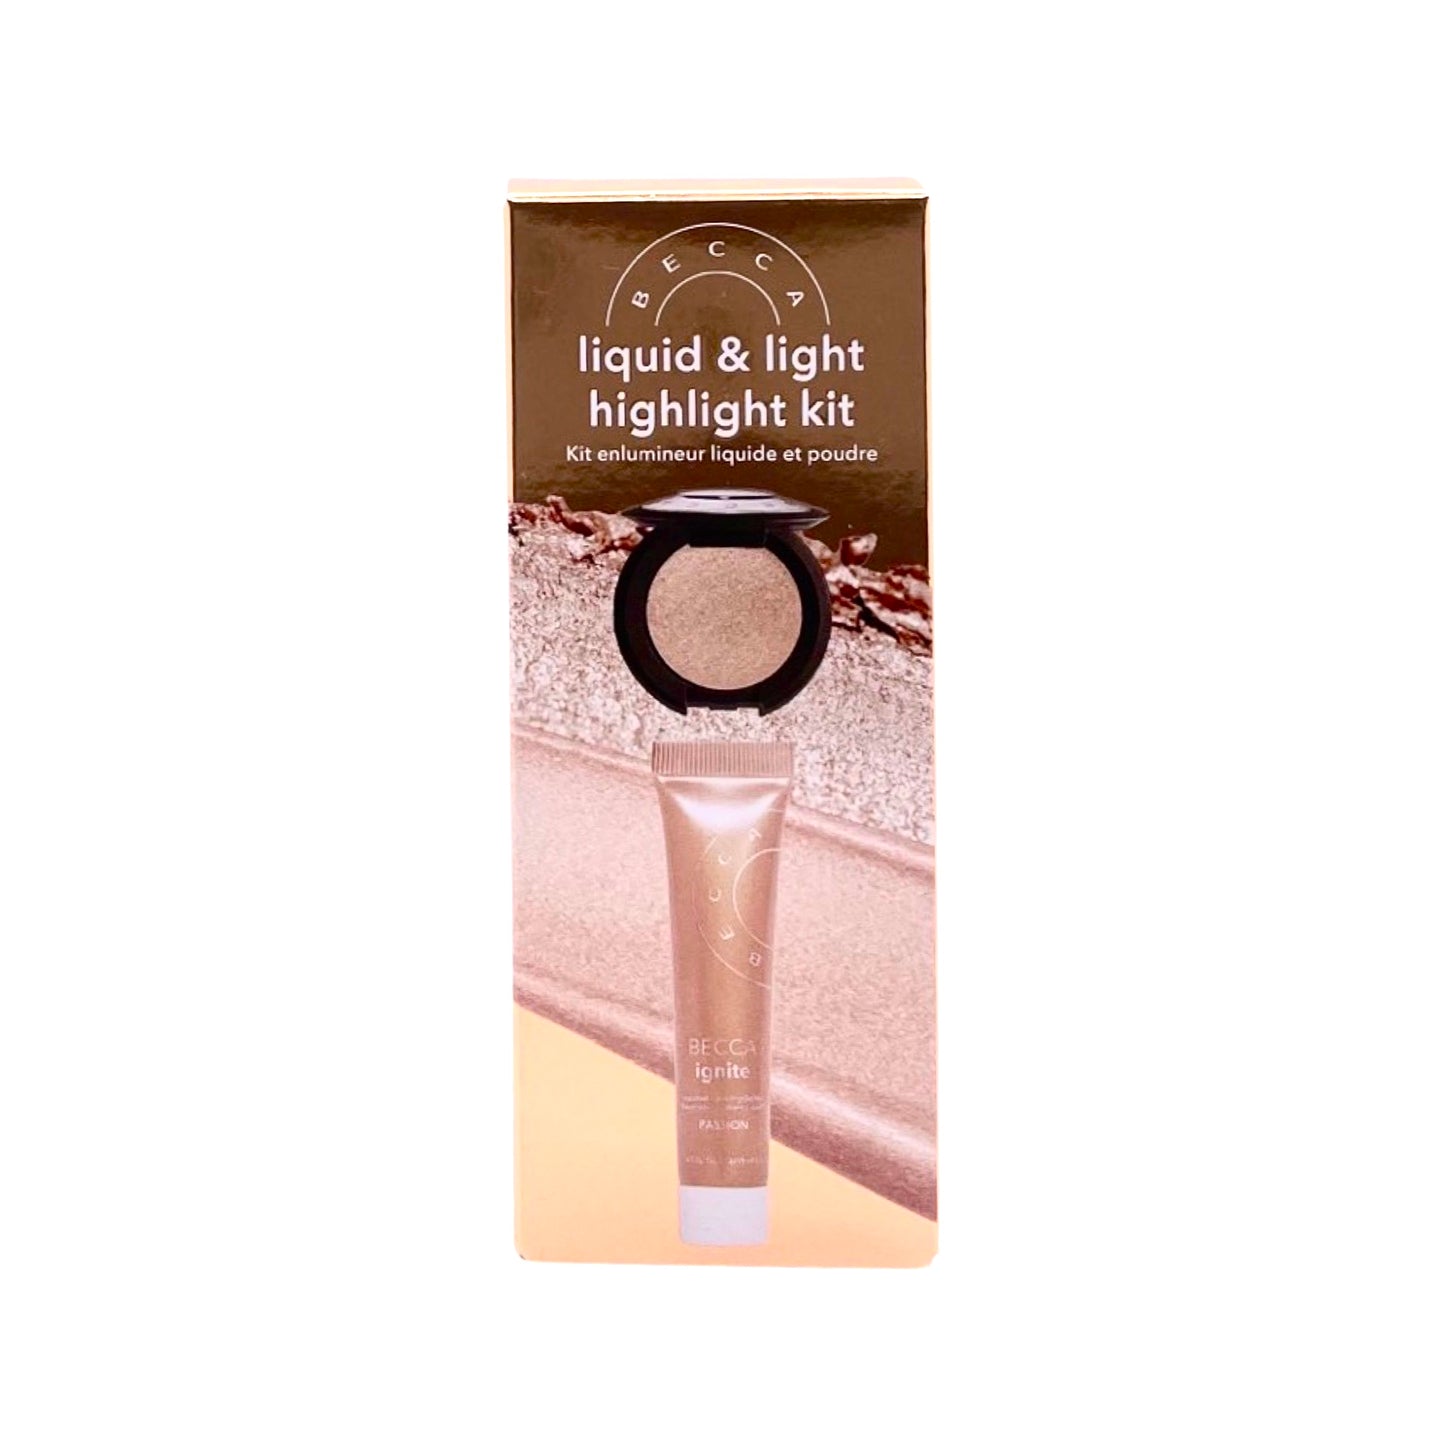 BECCA LIQUID AND LIGHT HIGHLIGHT KIT - SHIMMERING SKIN PERFECTOR PRESSED 0.085 oz / 2.4 g (OPAL) & IGNITE LIQUIFIED LIQUID HIGHLIGTER 0.5 fl.oz. / 15 ml (PASSION)